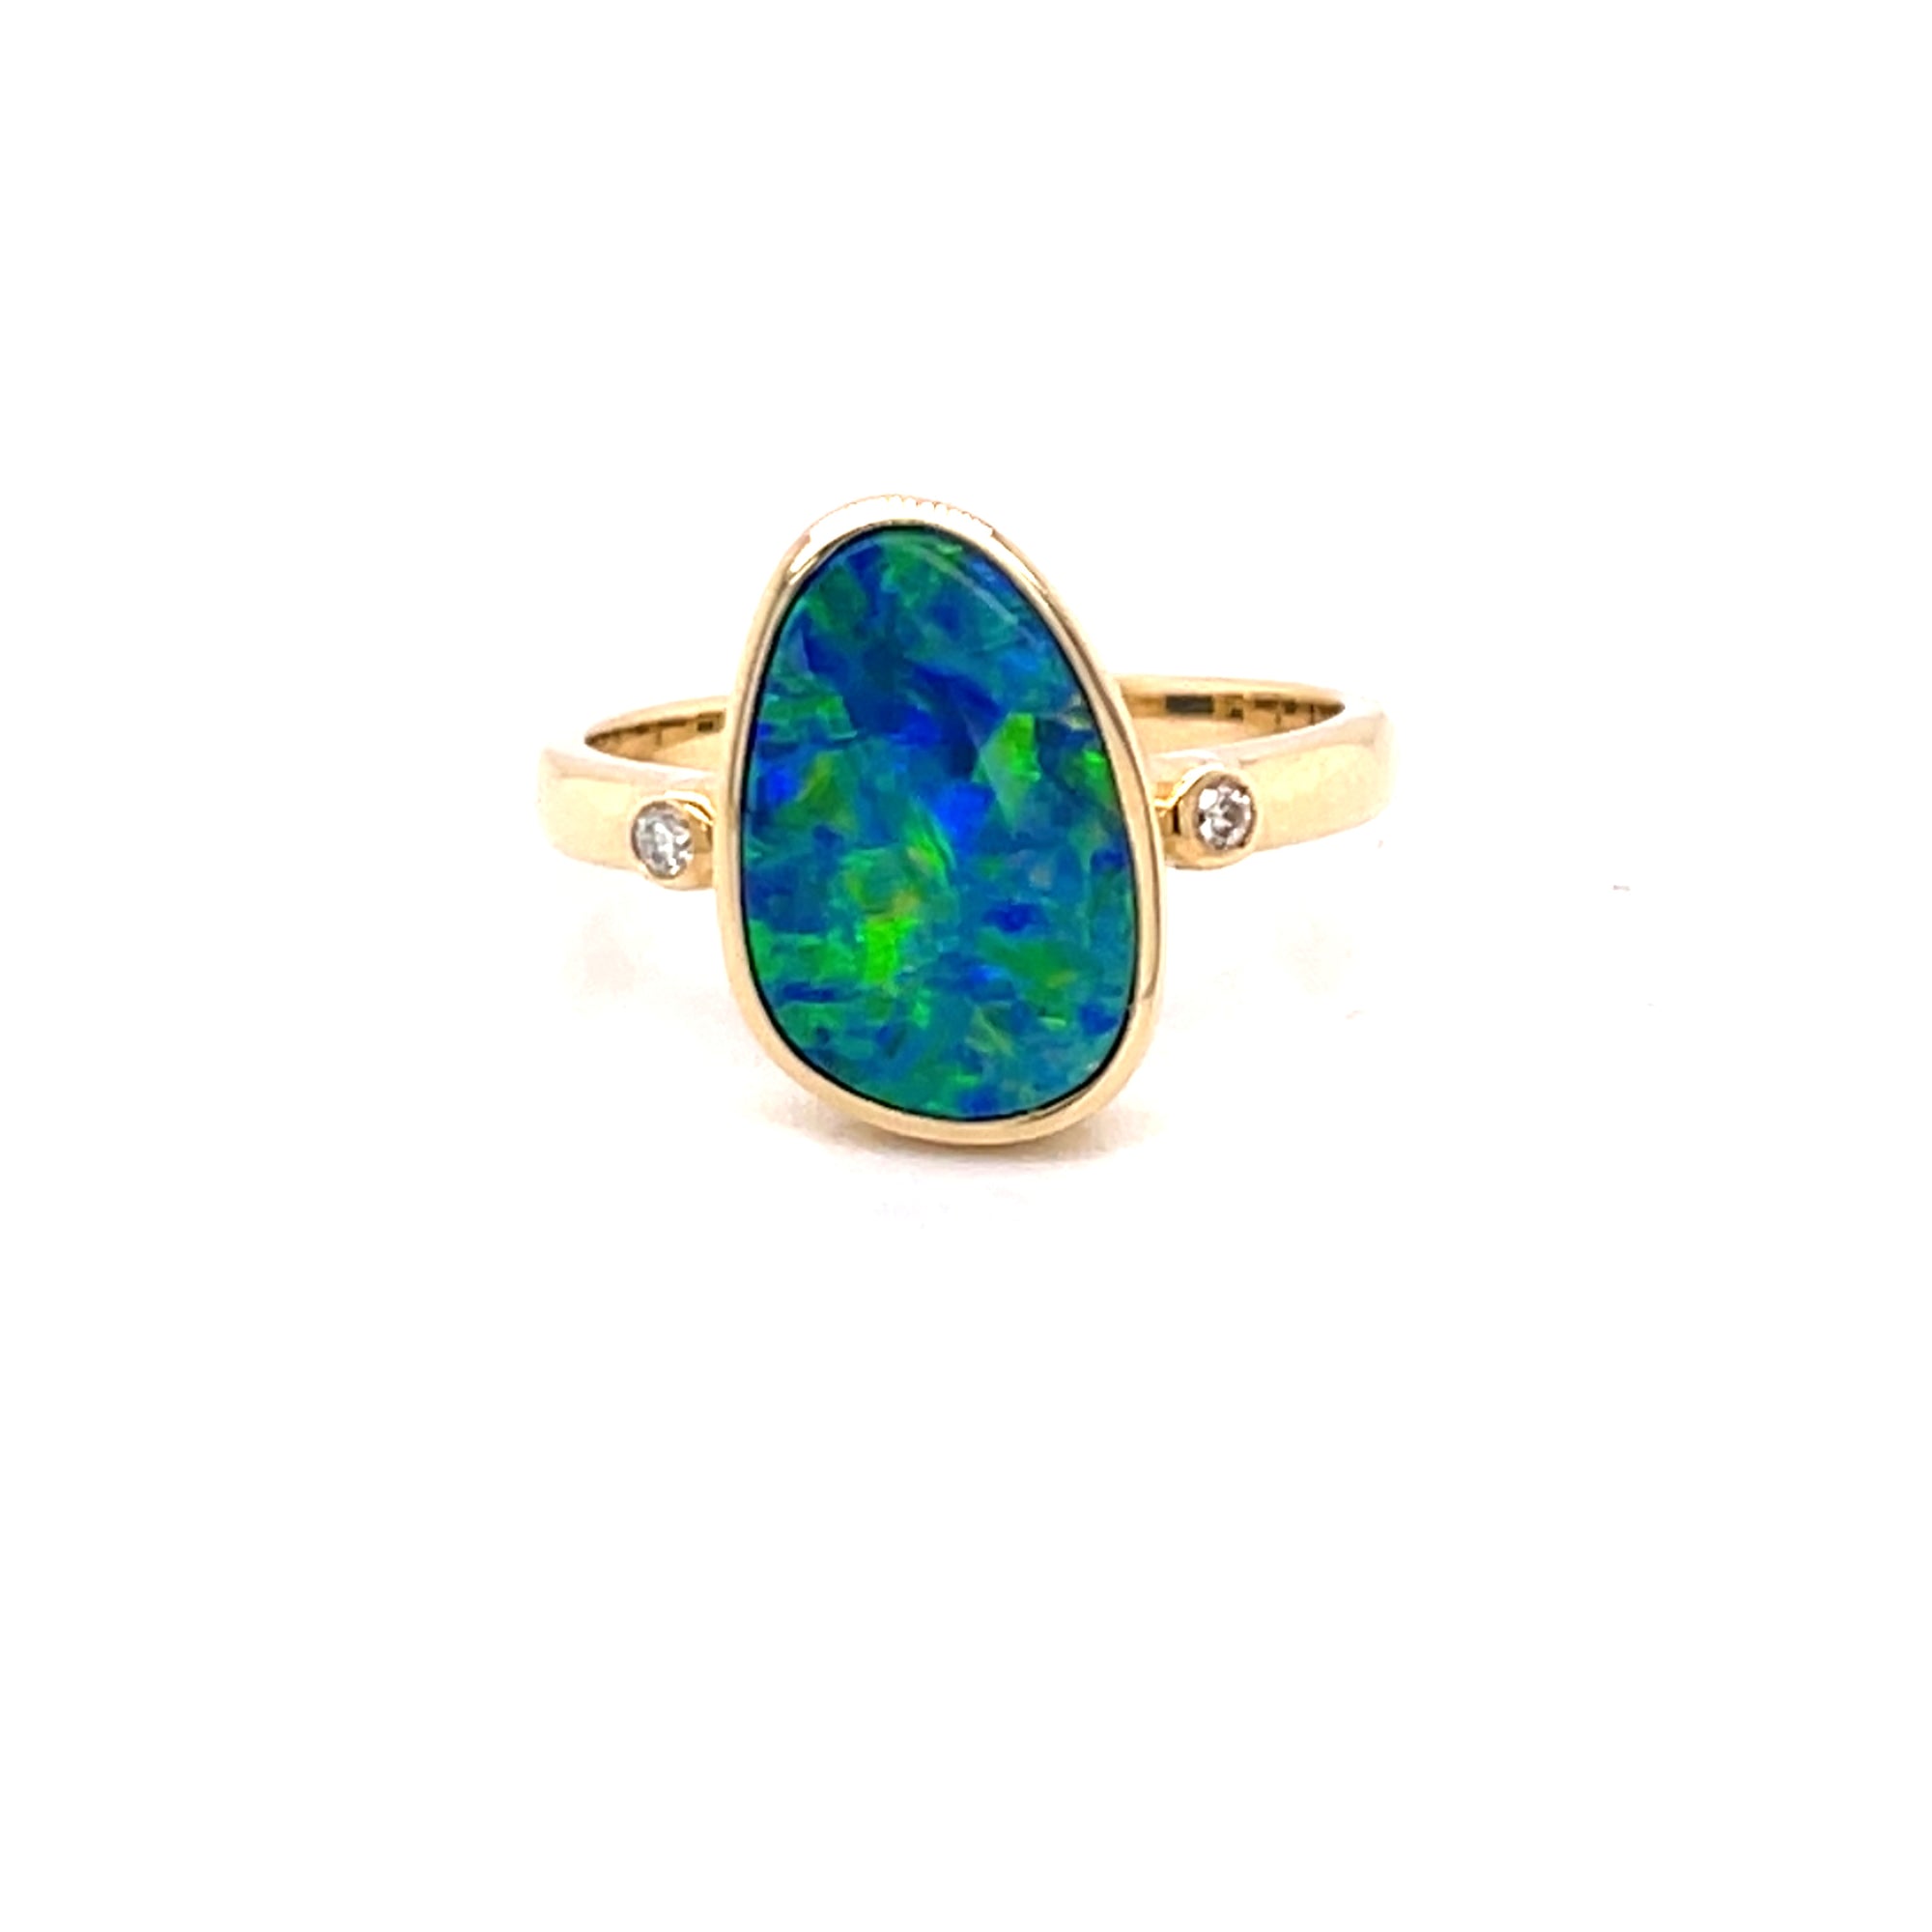 14K Yellow Gold Opal Doublet Ring with Diamond Accents